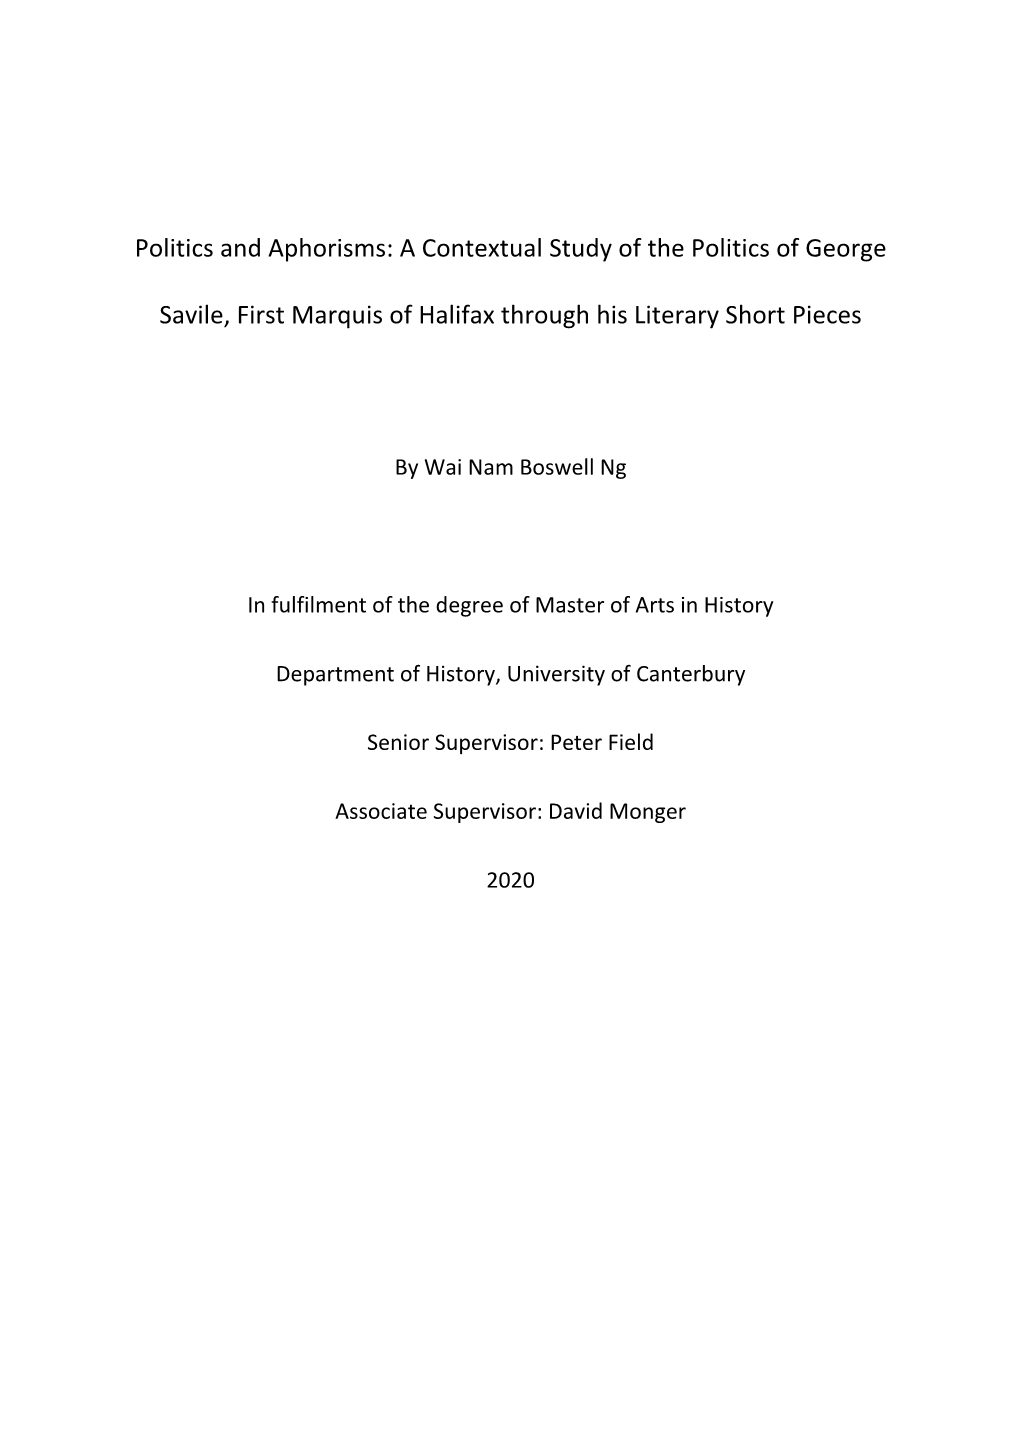 A Contextual Study of the Politics of George Savile, First Marquis Of